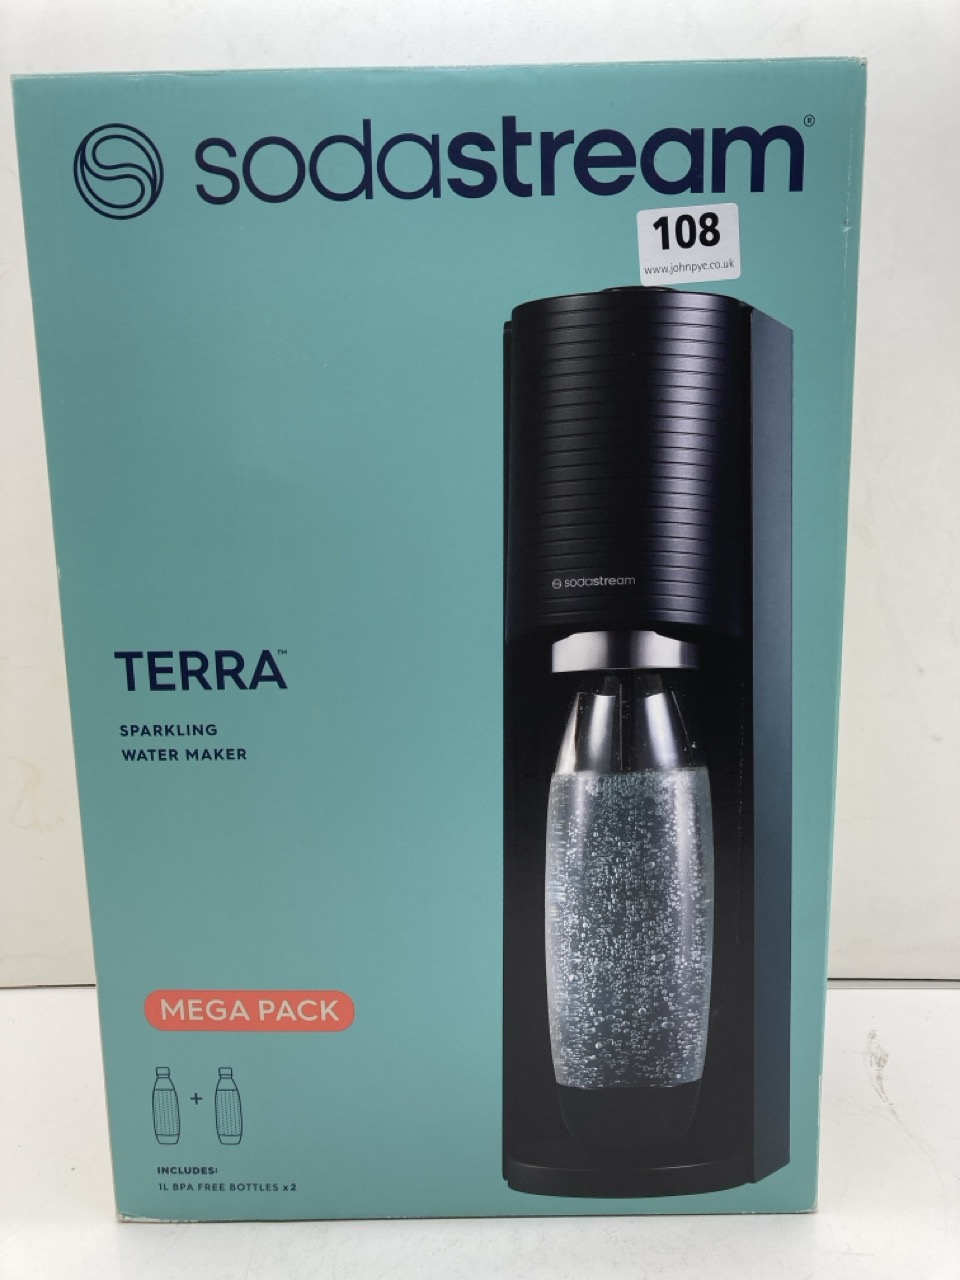 A SODASTREAM, TERRA, SPARKLING WATER MAKER, INCLUDES 1L BPA FREE BOTTLES X 2